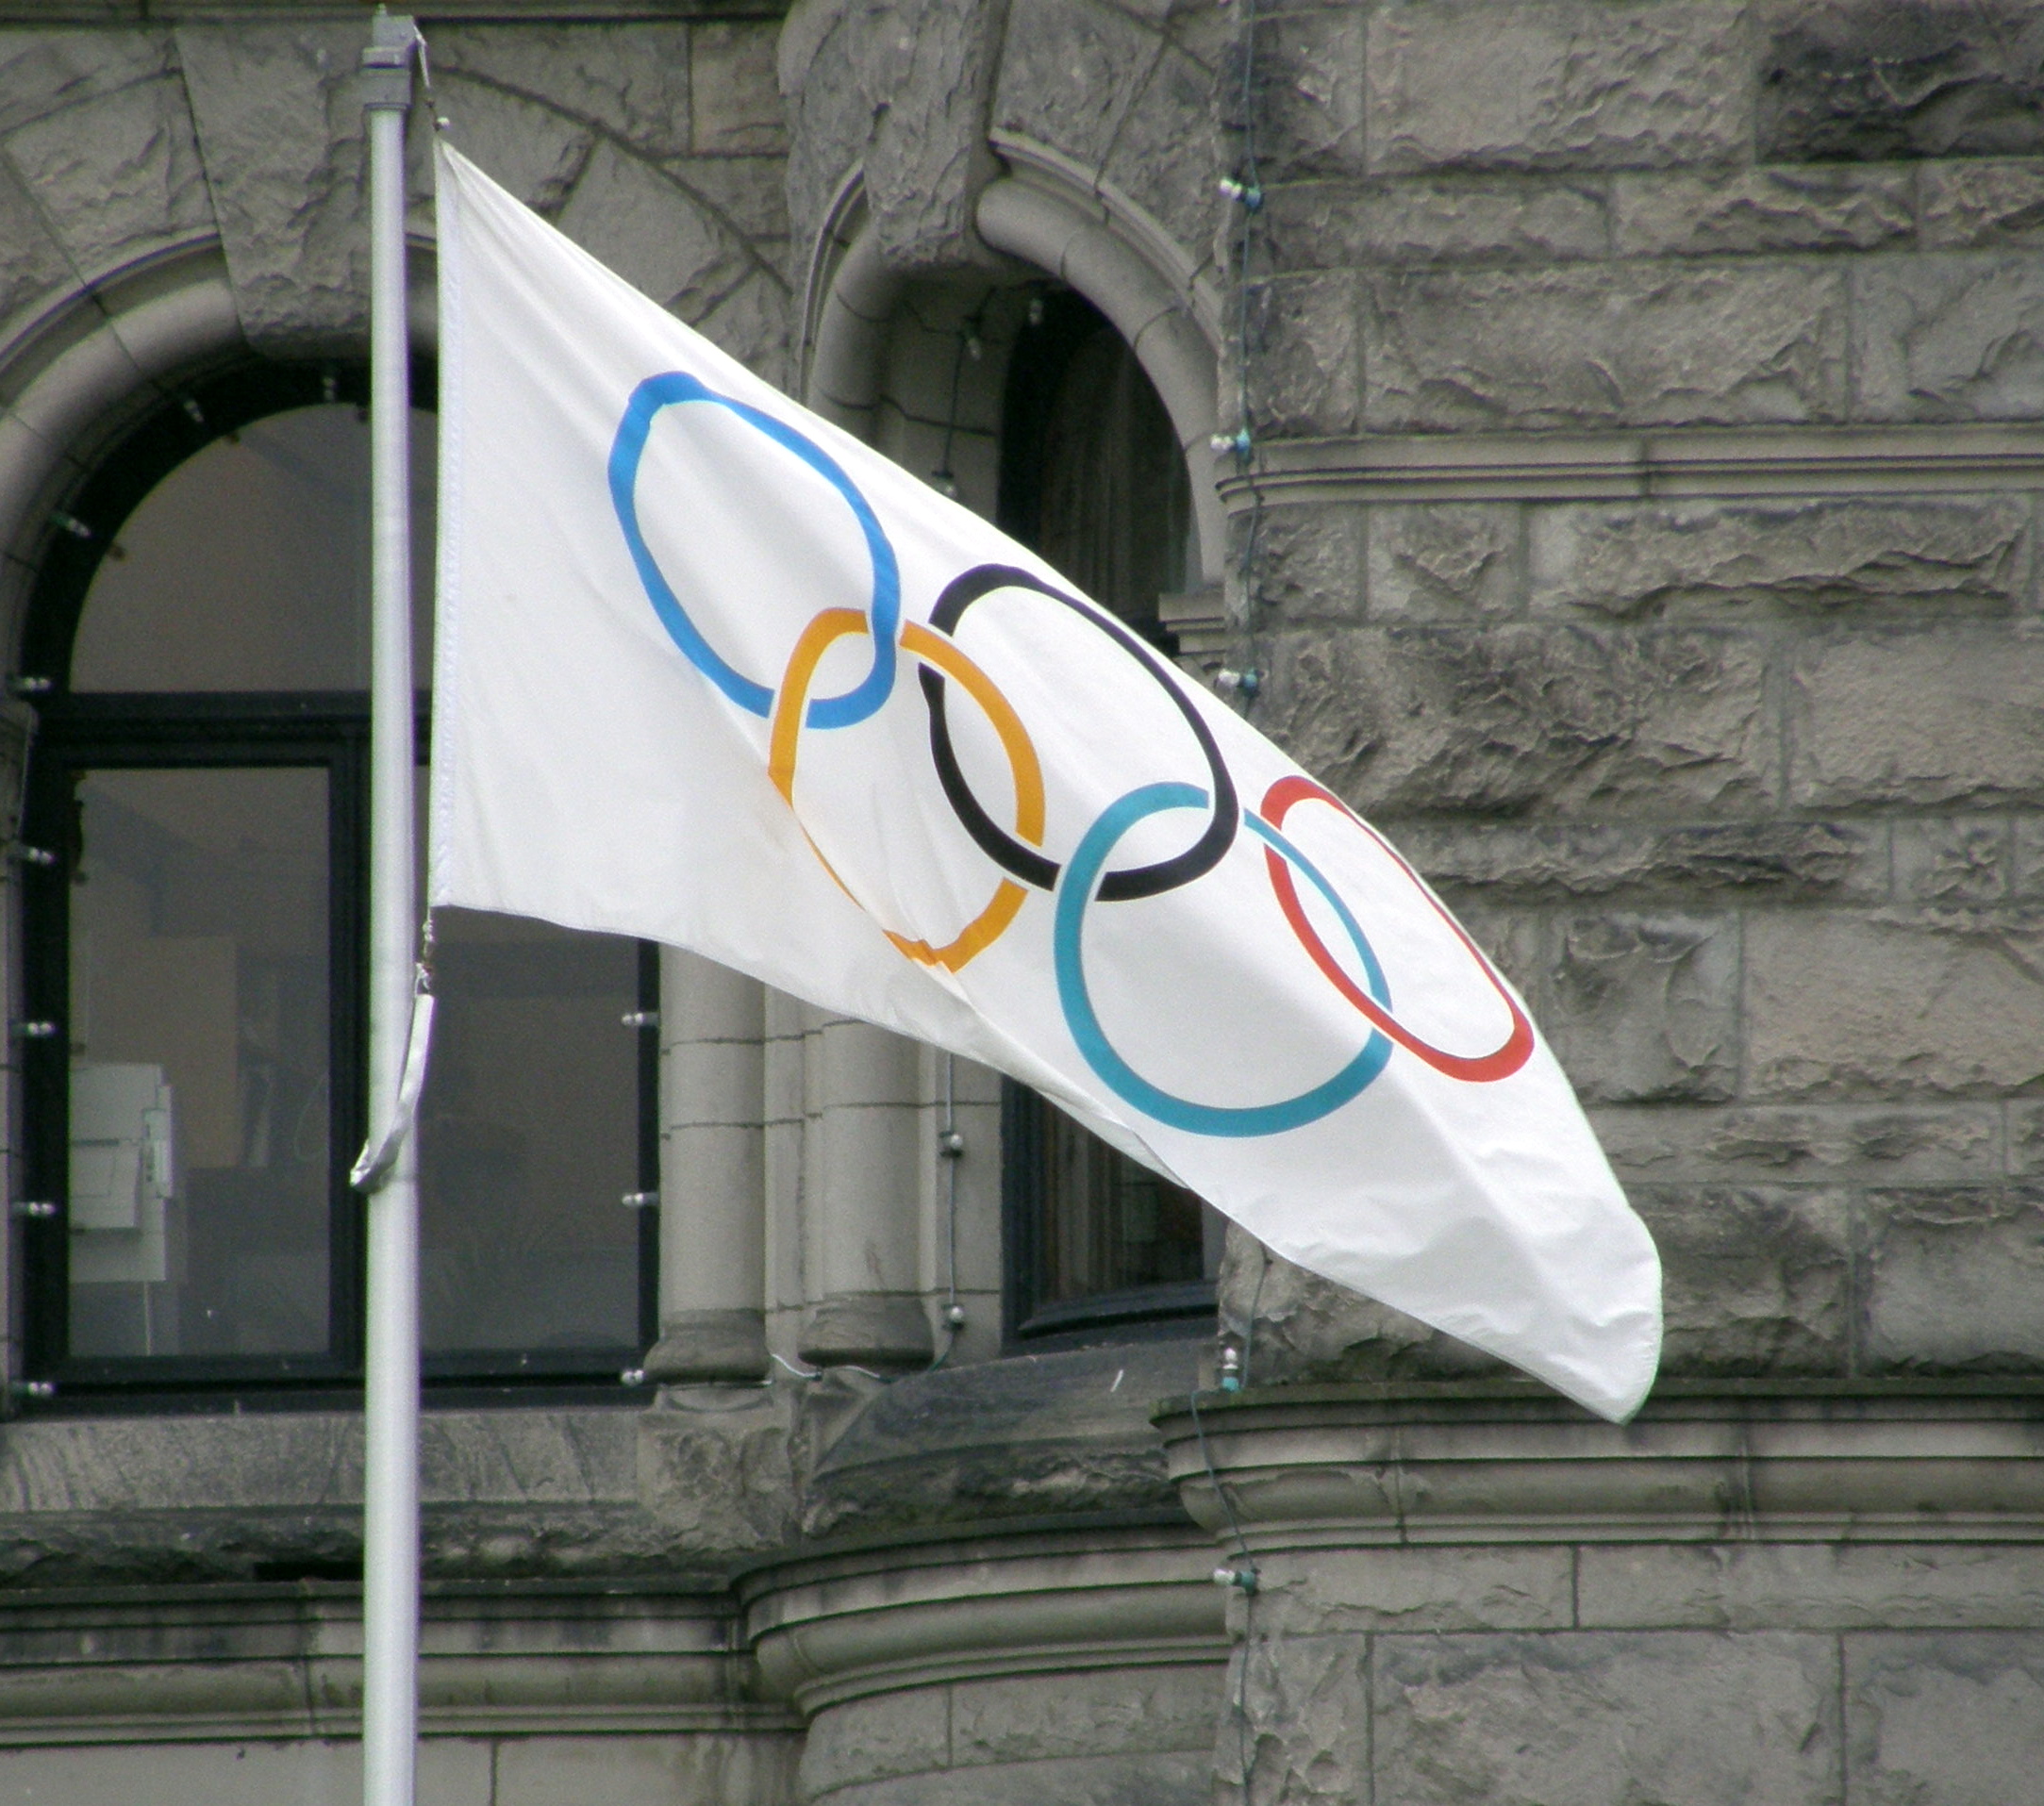 The Olympic Flag. By Makaristos - Own work, Public Domain, https://commons.wikimedia.org/w/index.php?curid=4787743